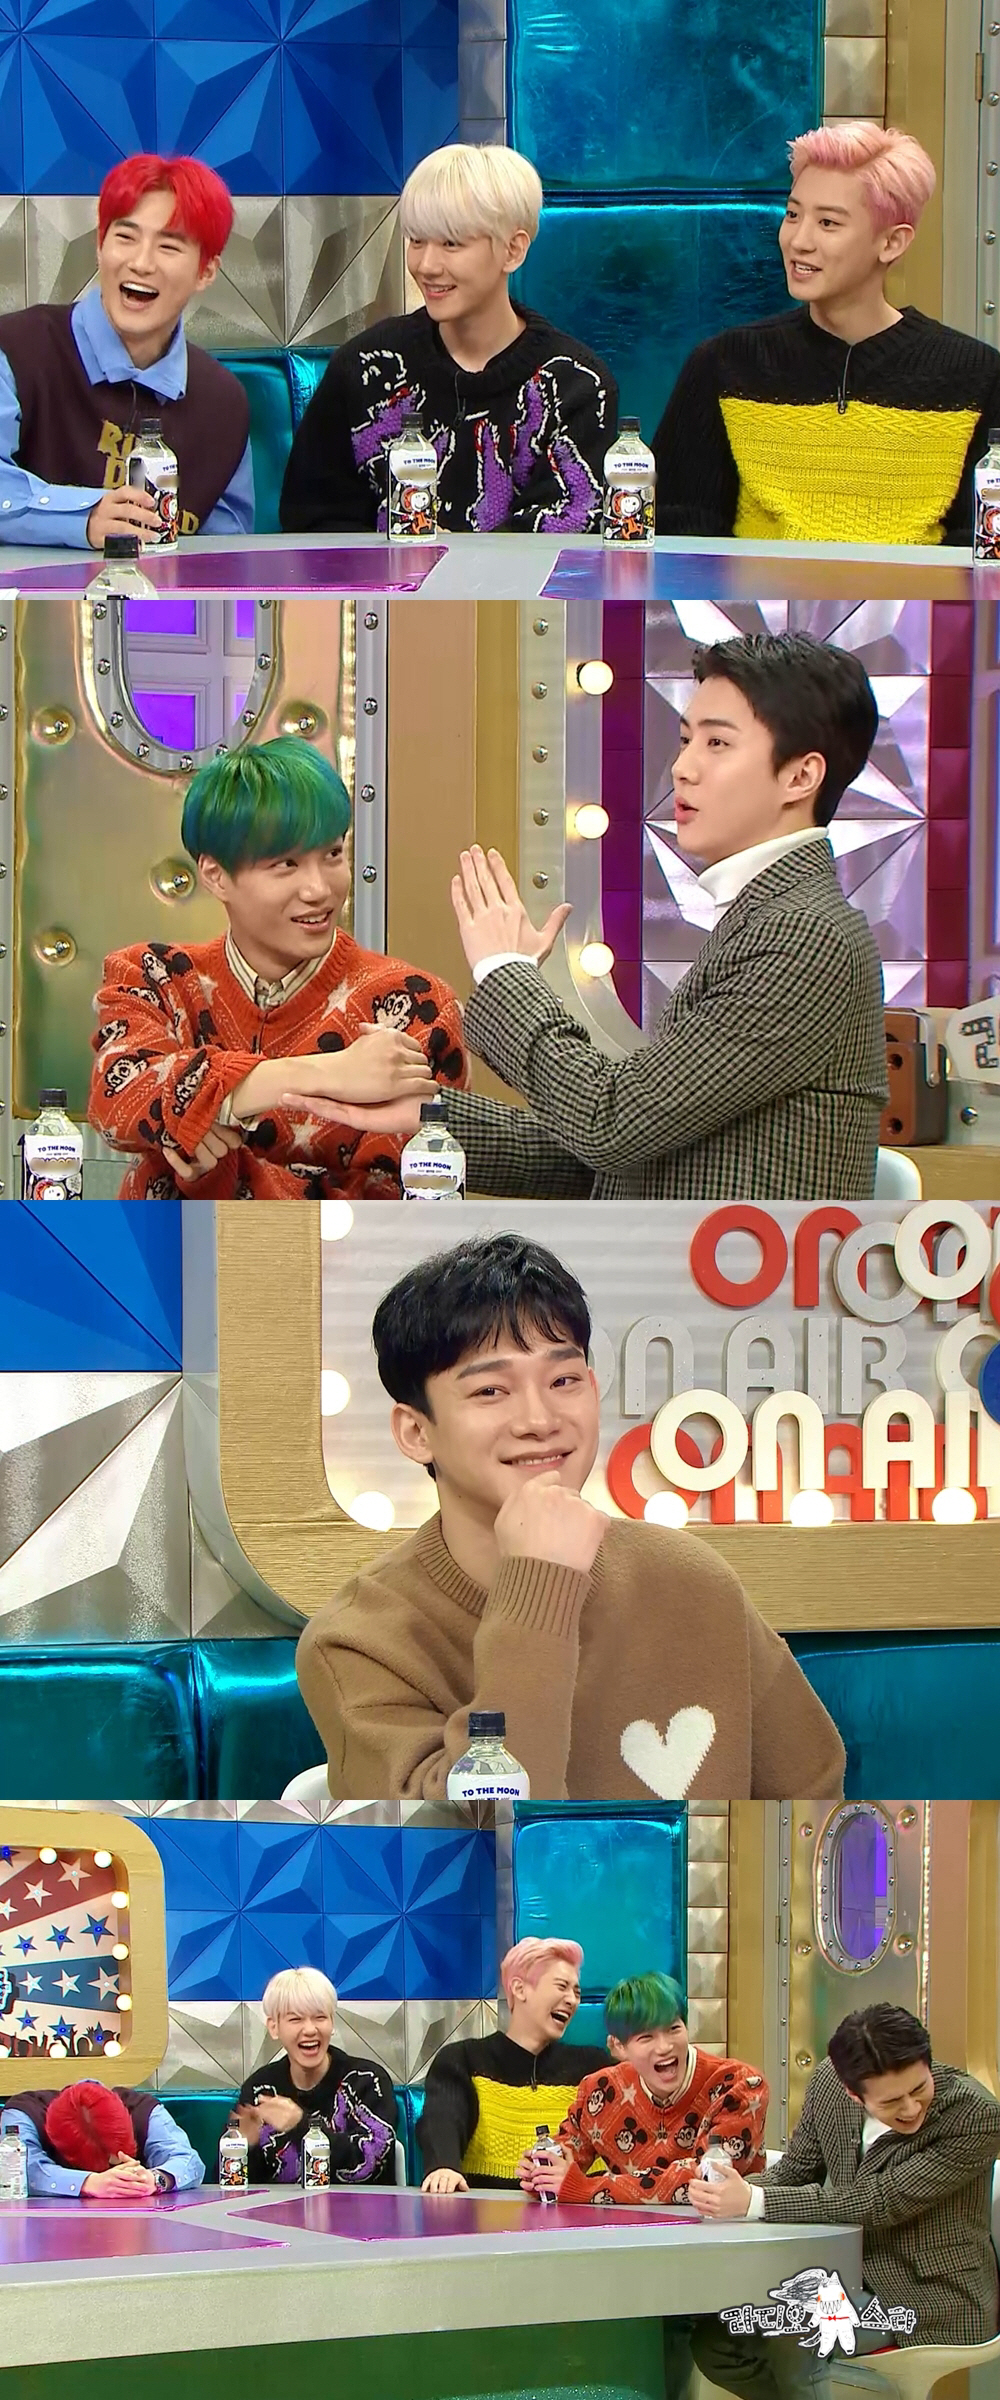 The group EXO (EXO) will appear on Radio Star as a six-member complete.They are expected to have a harsh Radio Star ceremony, revealing everything from unexpected Slack Battle to the mention of the contract.MBC Radio Star, a high-quality talk show scheduled to be broadcasted at 11:05 pm on Wednesday, will be featured in EXO Radio Star featuring EXO Suho, Baek Hyun, Chan Yeol, Kai, Sehun and Chen.EXO, who returned to his regular 6th album OBSESSION, chose Radio Star as a comeback entertainment. Especially, this time, it is meaningful to announce the news of the appearance with six people.As all the members except Chen are the first appearance of Radio Star, interest in what stories they will solve is already hot.First, they will laugh at the leader Suho Mole throughout the broadcast. Members except Suho, MCs showed the best unity.Attention is focusing on whether Suho can survive among them.EXO also adds fun to the unexpected Slack Battle, which has been in the eighth year of its activities since time, saying, When we are ...Among them, it is known that there are people who have gathered their mouths and pointed out as Slack.Chen sits in the seat of this special MC.Chen, who has been the only member of the Radio Star experience and has been in the special MC position, will play a role between Radio Star and EXO.Kim Gura also said that he admired EXO was so fun?In addition, they are known to have solved the genuine talk without hesitation, stimulating curiosity.It is the back door that he expressed his gratitude to each other by revealing the difficult times and focused everyones attention by frankly mentioning the issue of EXOs renewal.EXO (EXO) The harsh entertainment ceremony of the complete body can be confirmed through Radio Star which is broadcasted at 11:05 pm on Wednesday, 4th.On the other hand, Radio Star is loved by many as a unique talk show that unarms guests with the dedication of a village killer who does not know where 4MCs are going and brings out real stories.